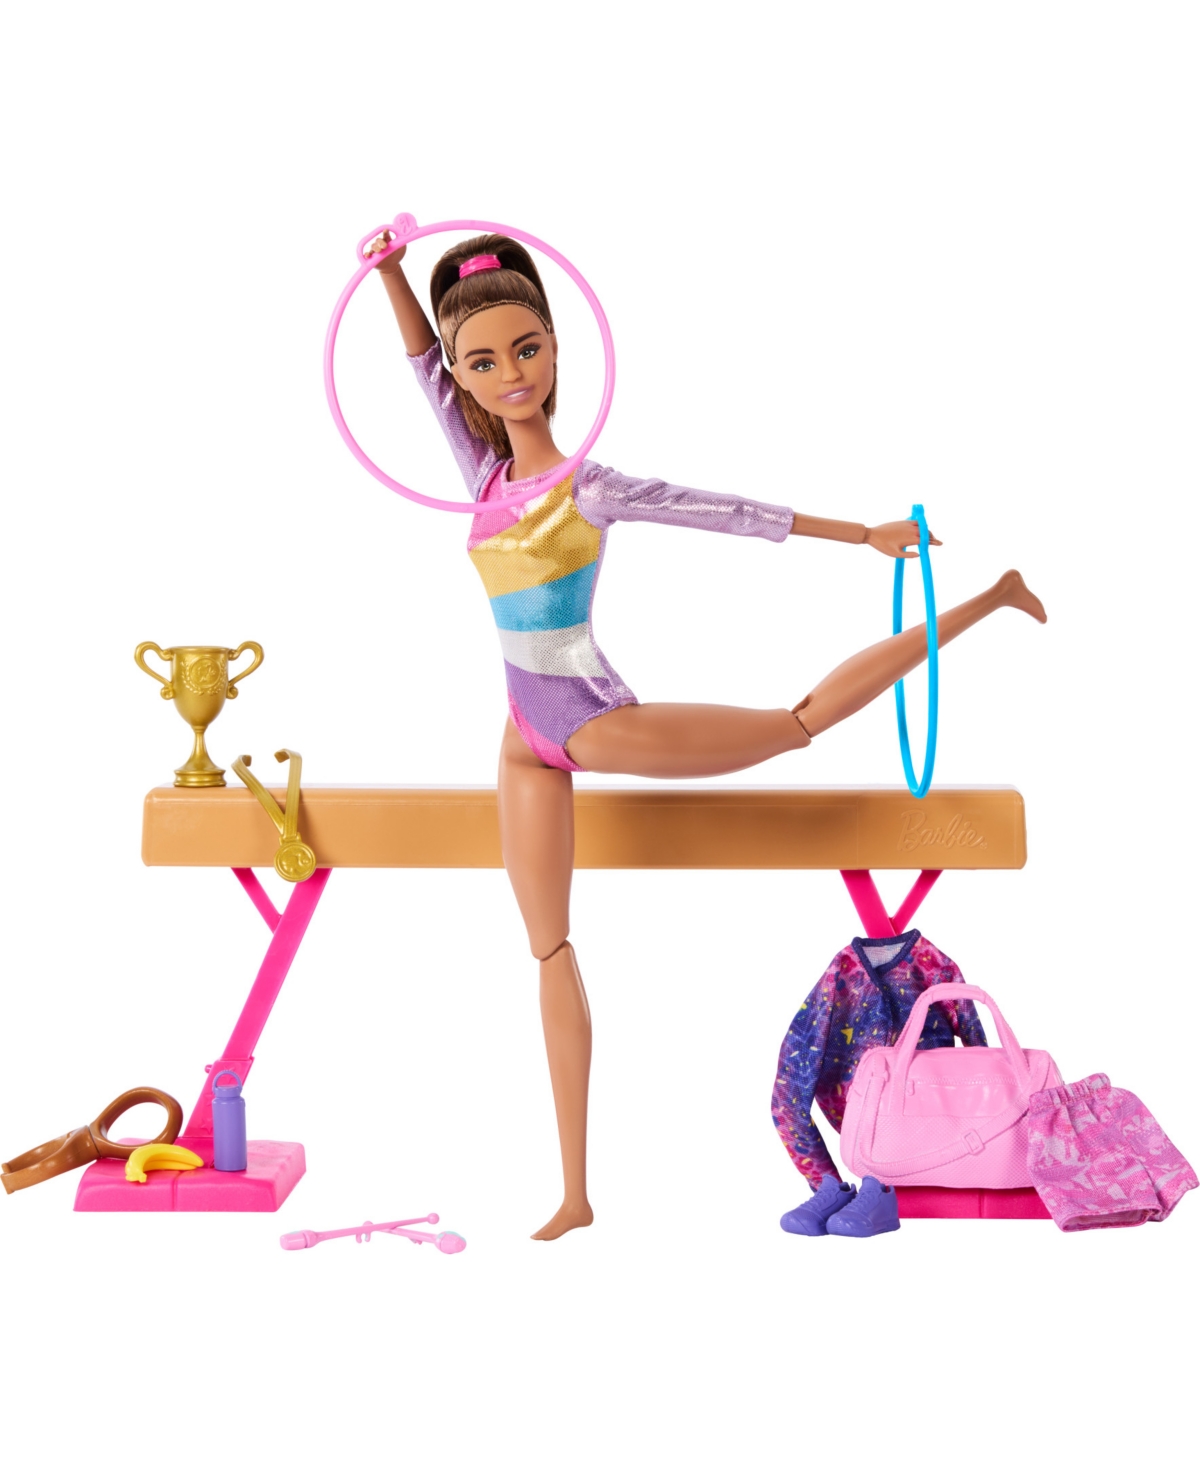 Barbie Kids' Gymnastics Play Set With Brunette Fashion Doll, Balance Beam, 10 Plus Accessories And Flip Feature In Pink